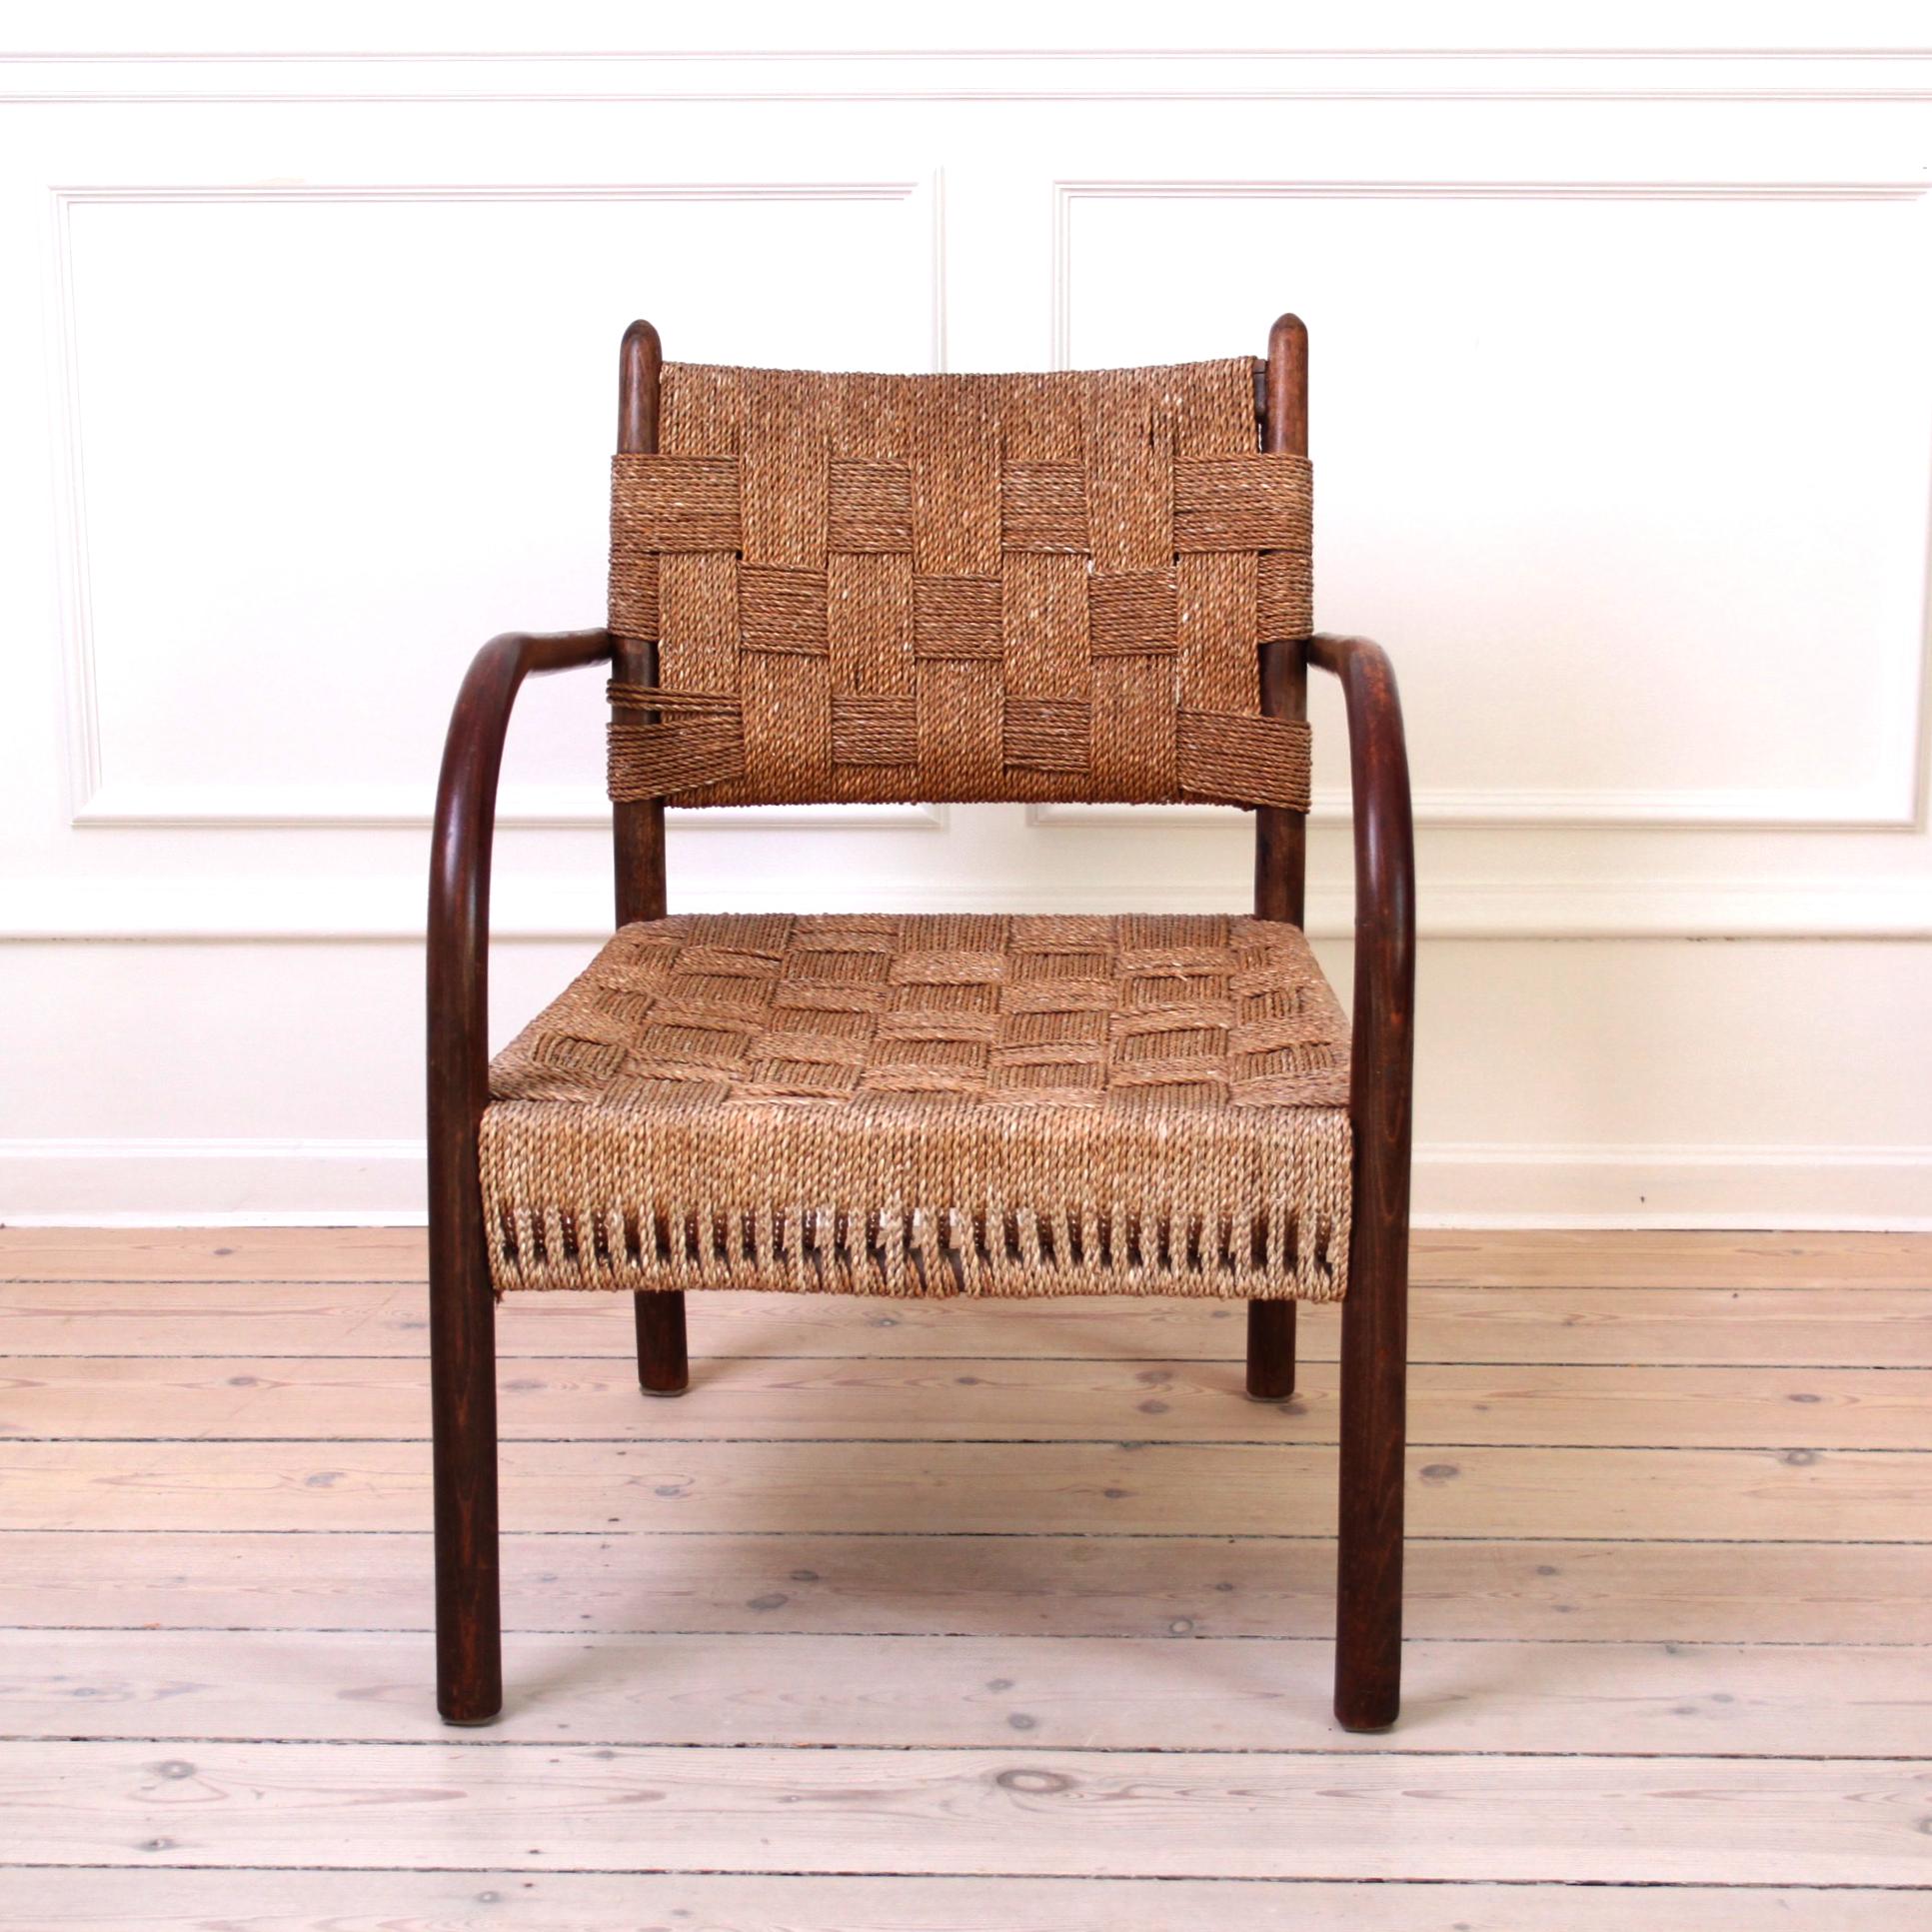 K. Scroder and Fritz Hansen - Denmark - Mid-Century Modern Design

Stained beech armchair with woven seagrass seat and back. 

Model 1459. 

Manufactured by Fritz Hansen, 1938

Until very recently this rare and sought after armchair was